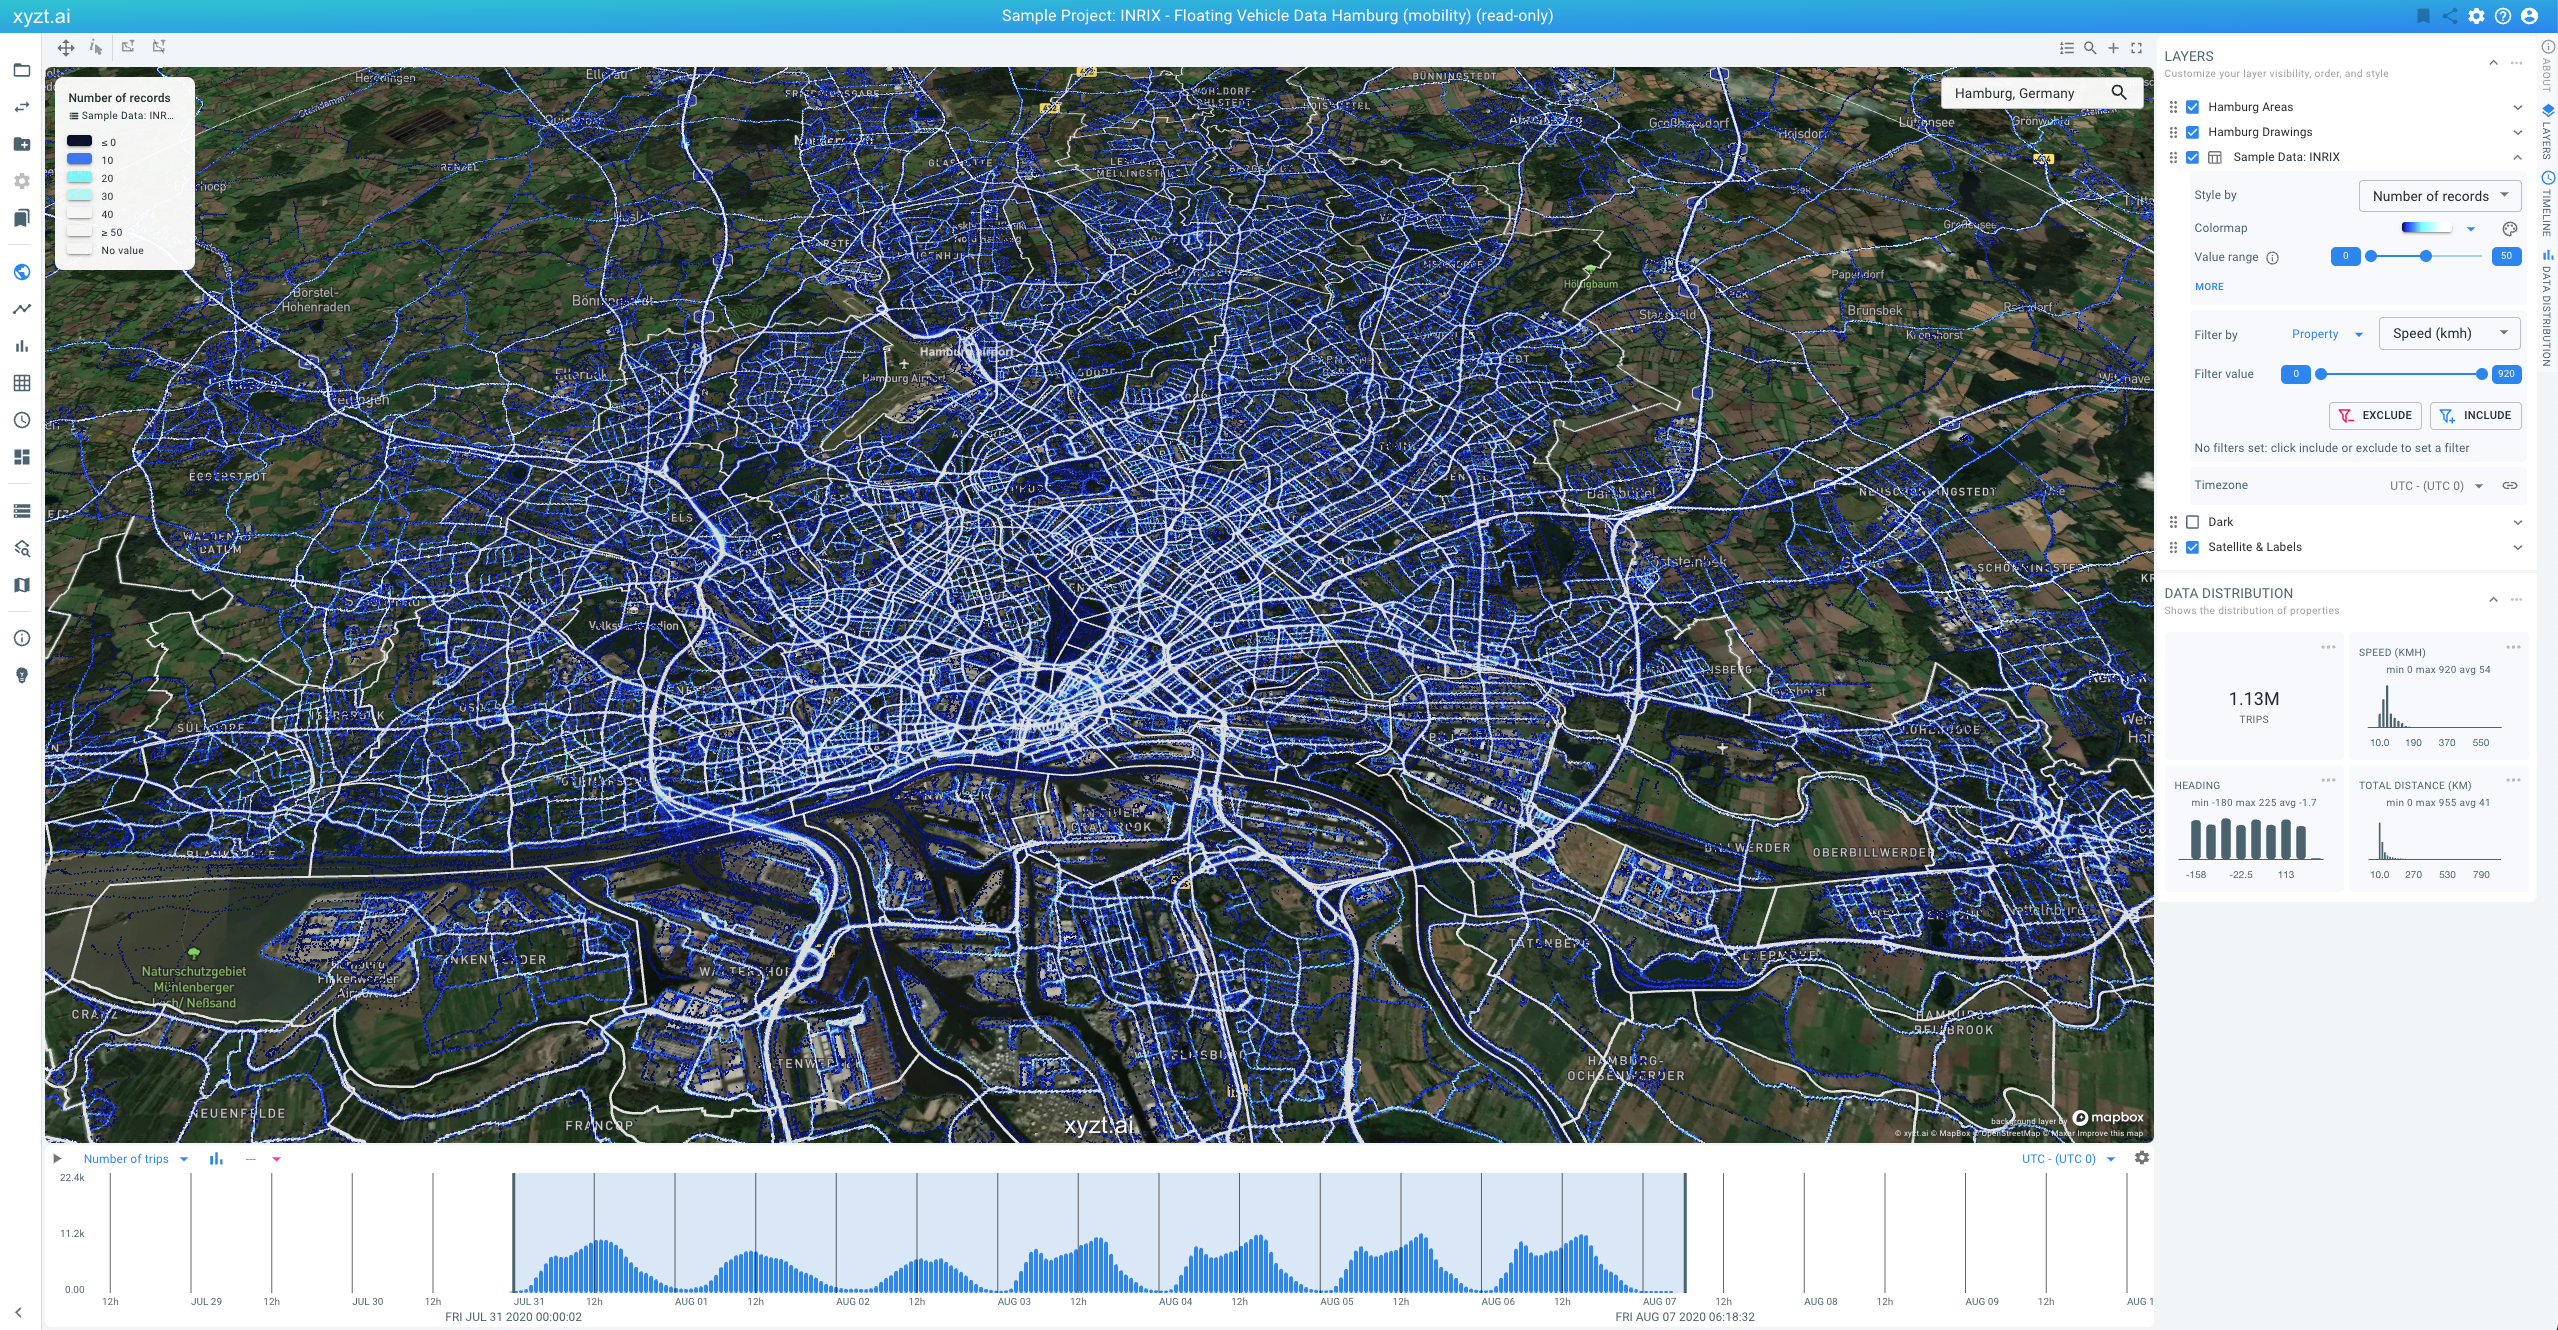 Hamburg uses xyzt.ai for mobility analytics with floating vehicle data from INRIX.